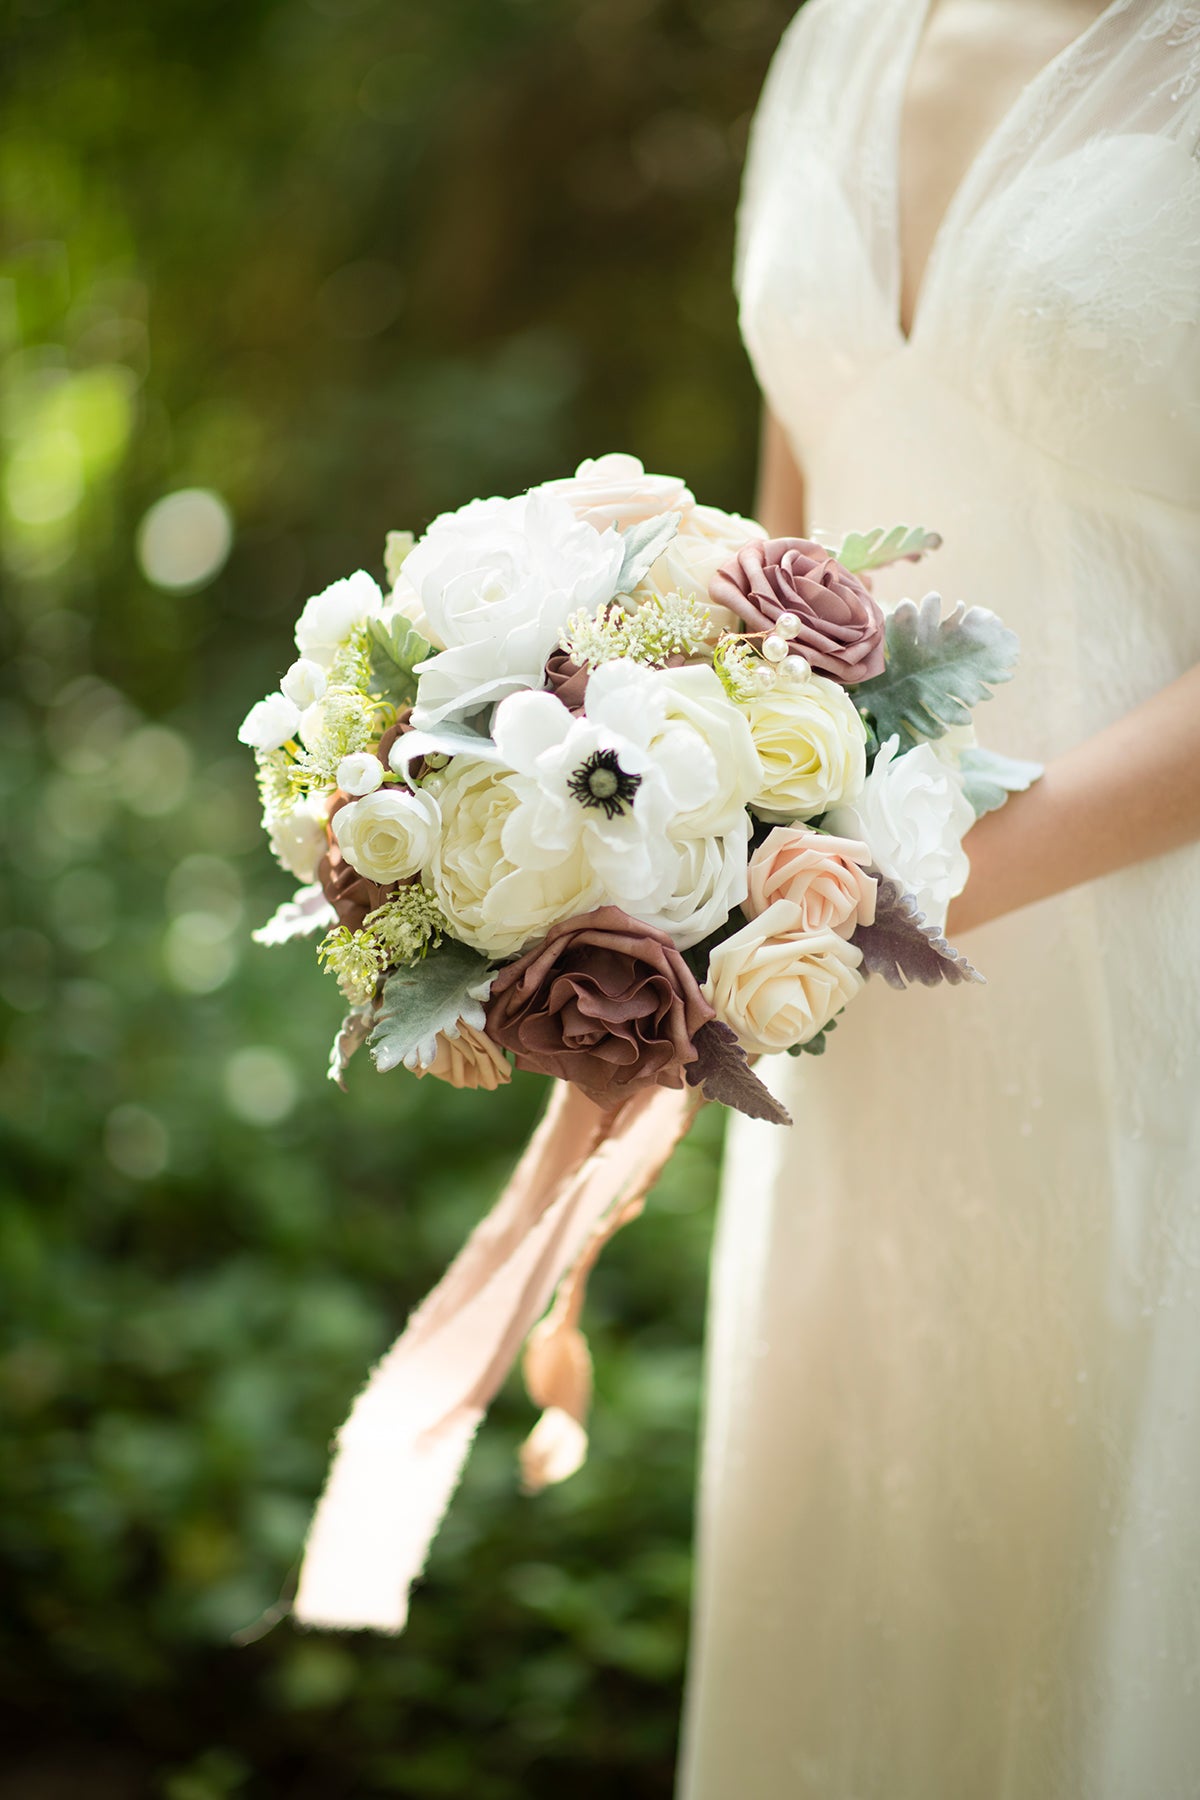 Small Round Bridal Bouquets in Dusty Rose & Cream